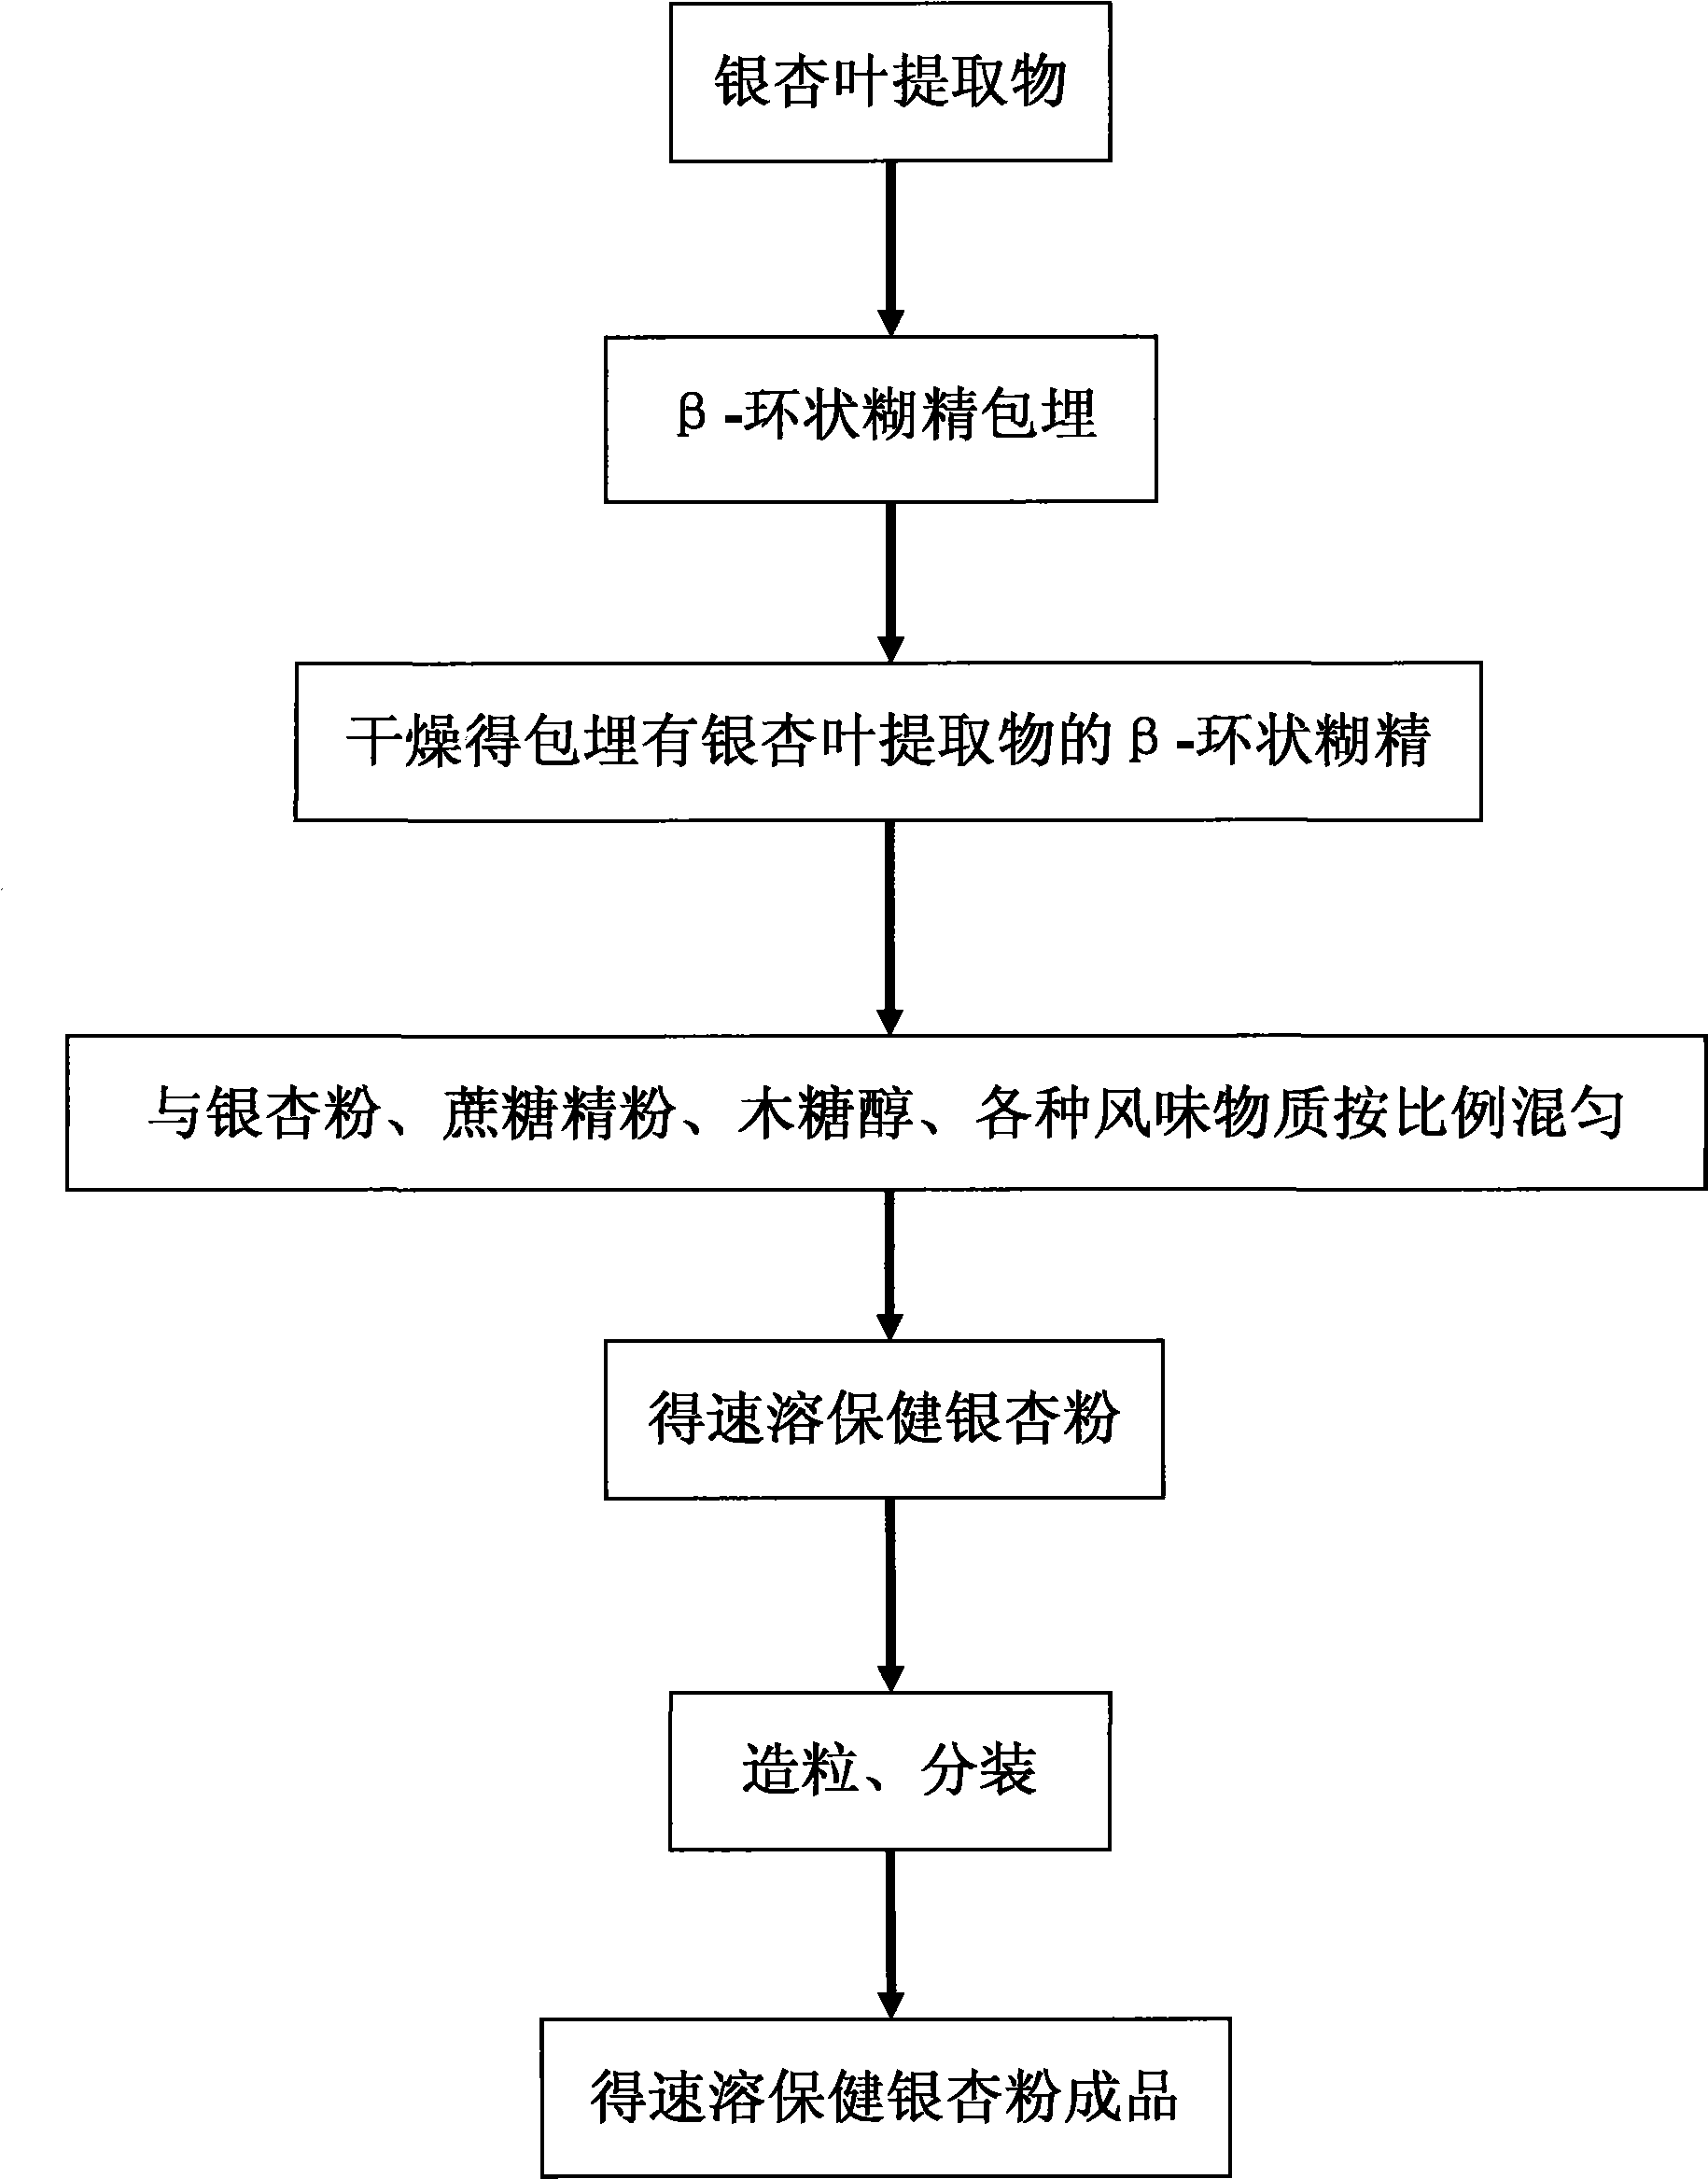 Method for producing instant health care ginkgo powder